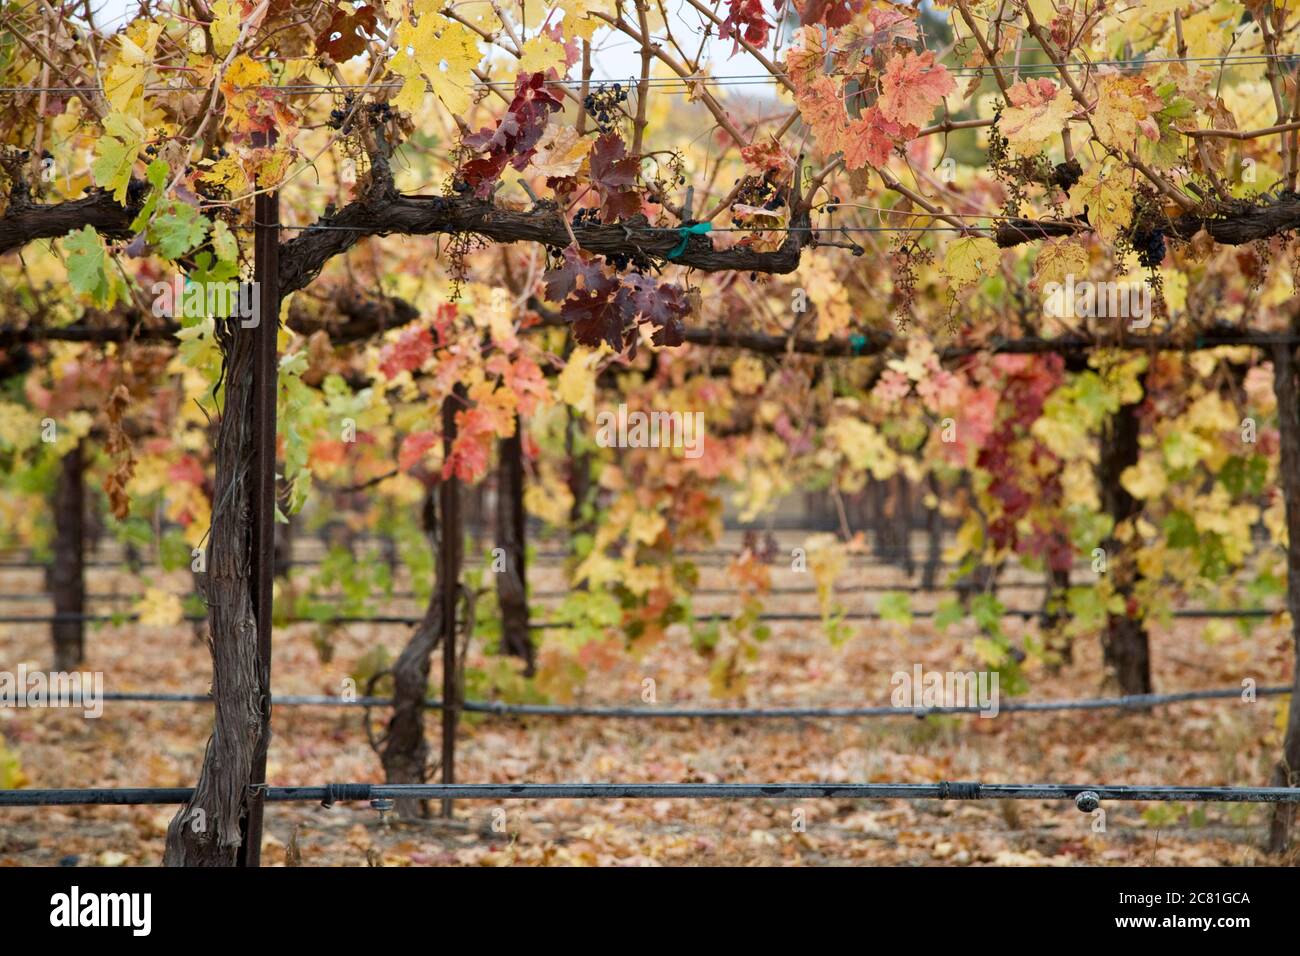 View through vines in a vineyard in the fall Stock Photo